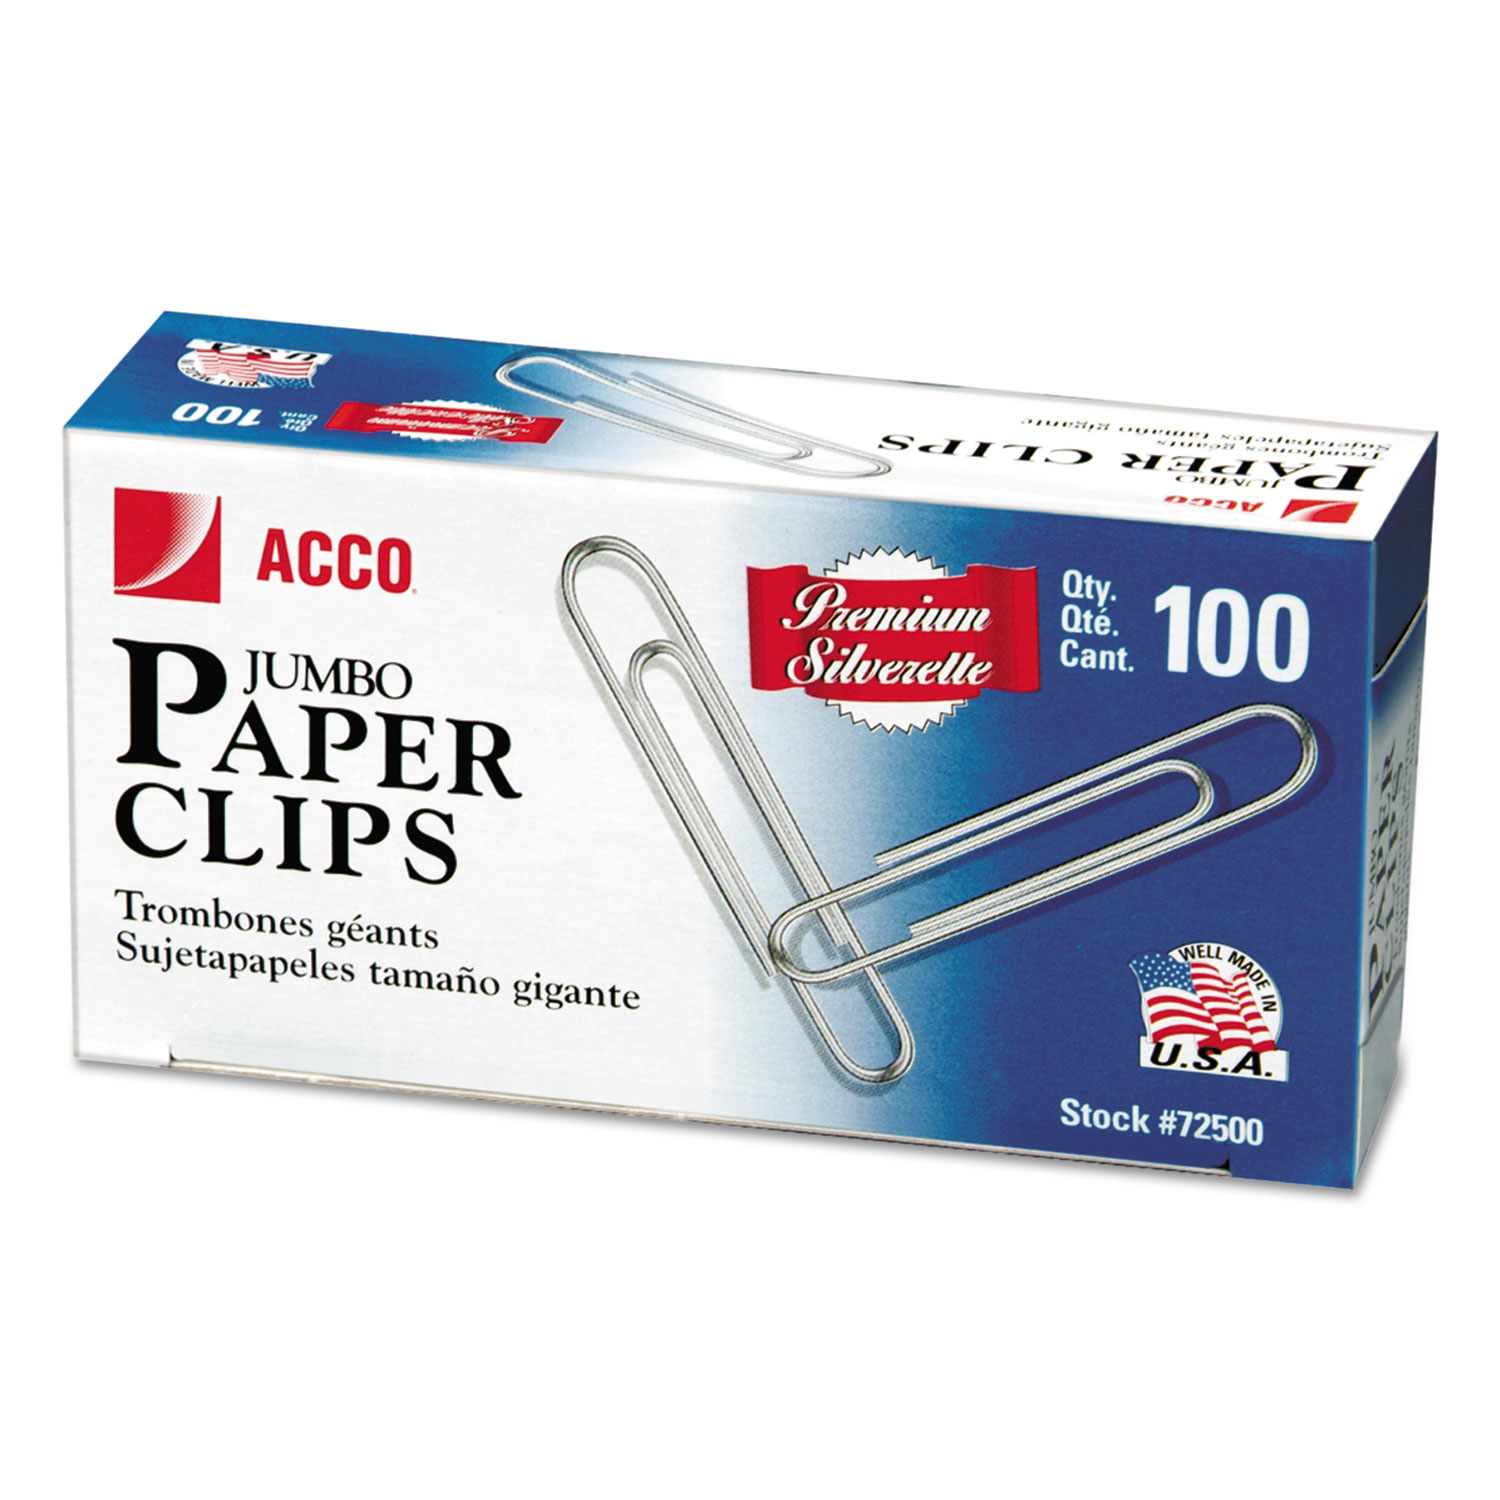 Premium Paper Clips, Smooth, Jumbo, Silver, 100/Box, 10 Boxes/Pack